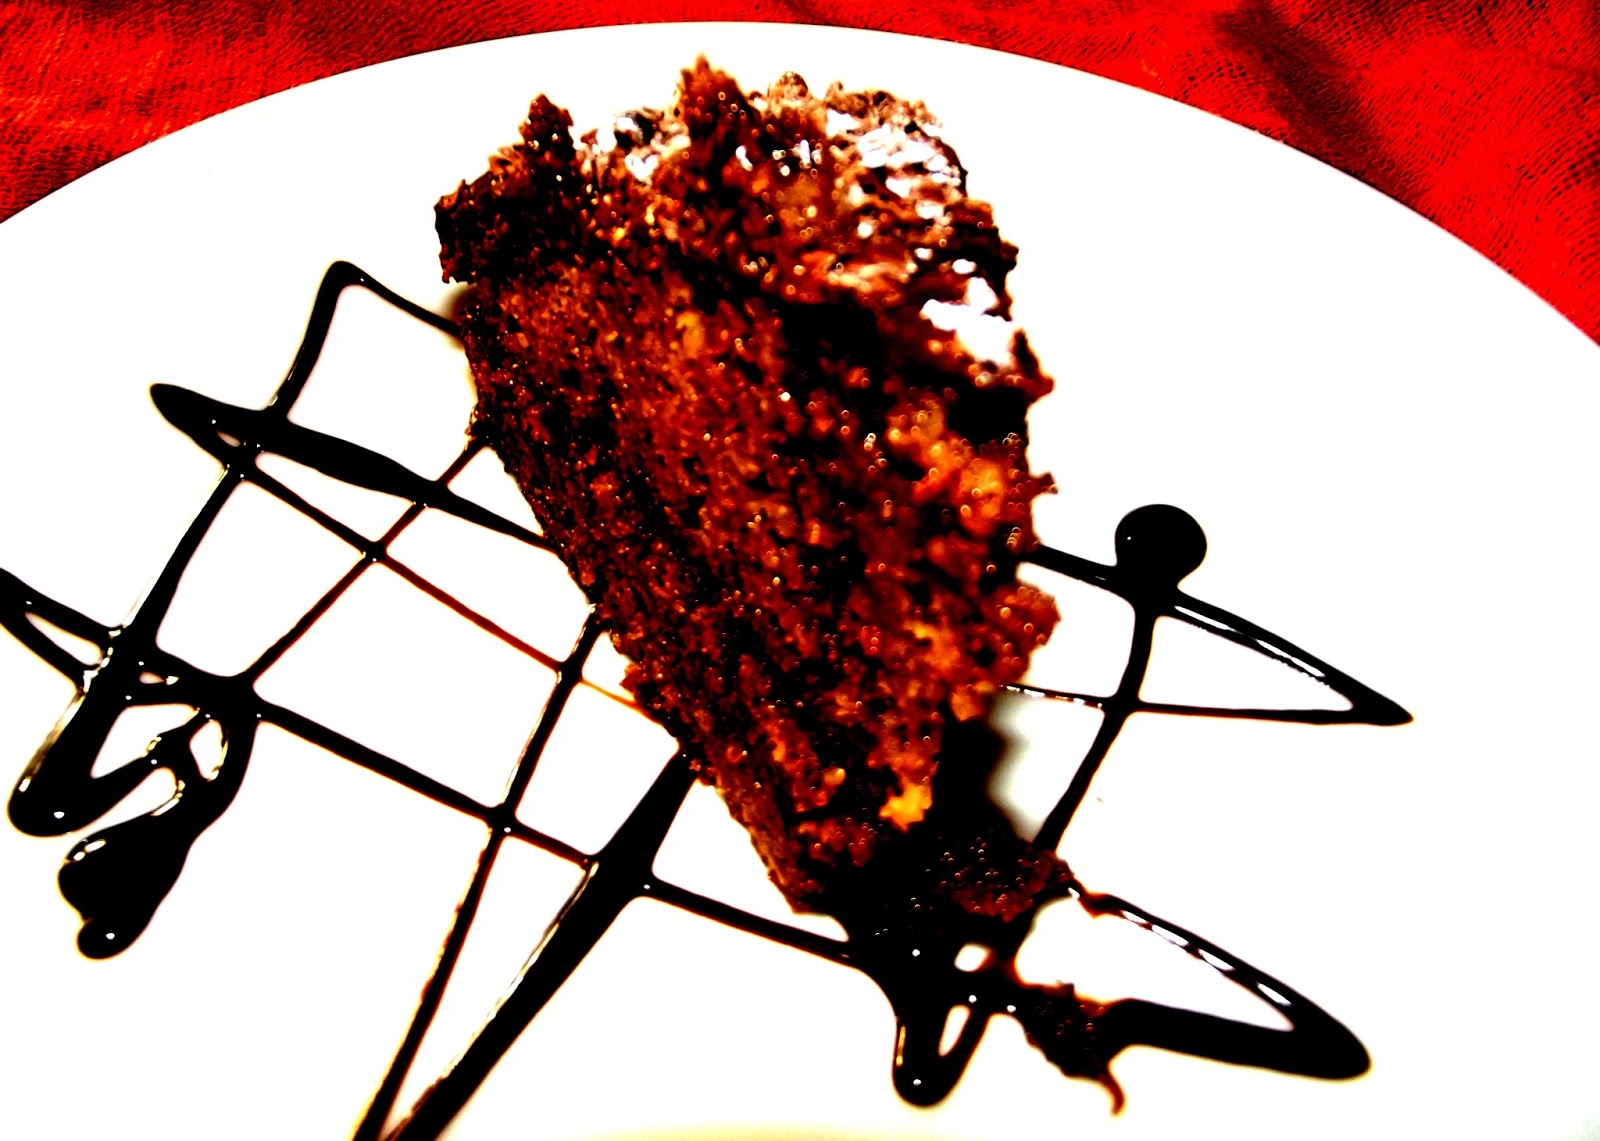 moist chocolate cake recipe Posted by Virginia Cordero Sanchez at 16:59